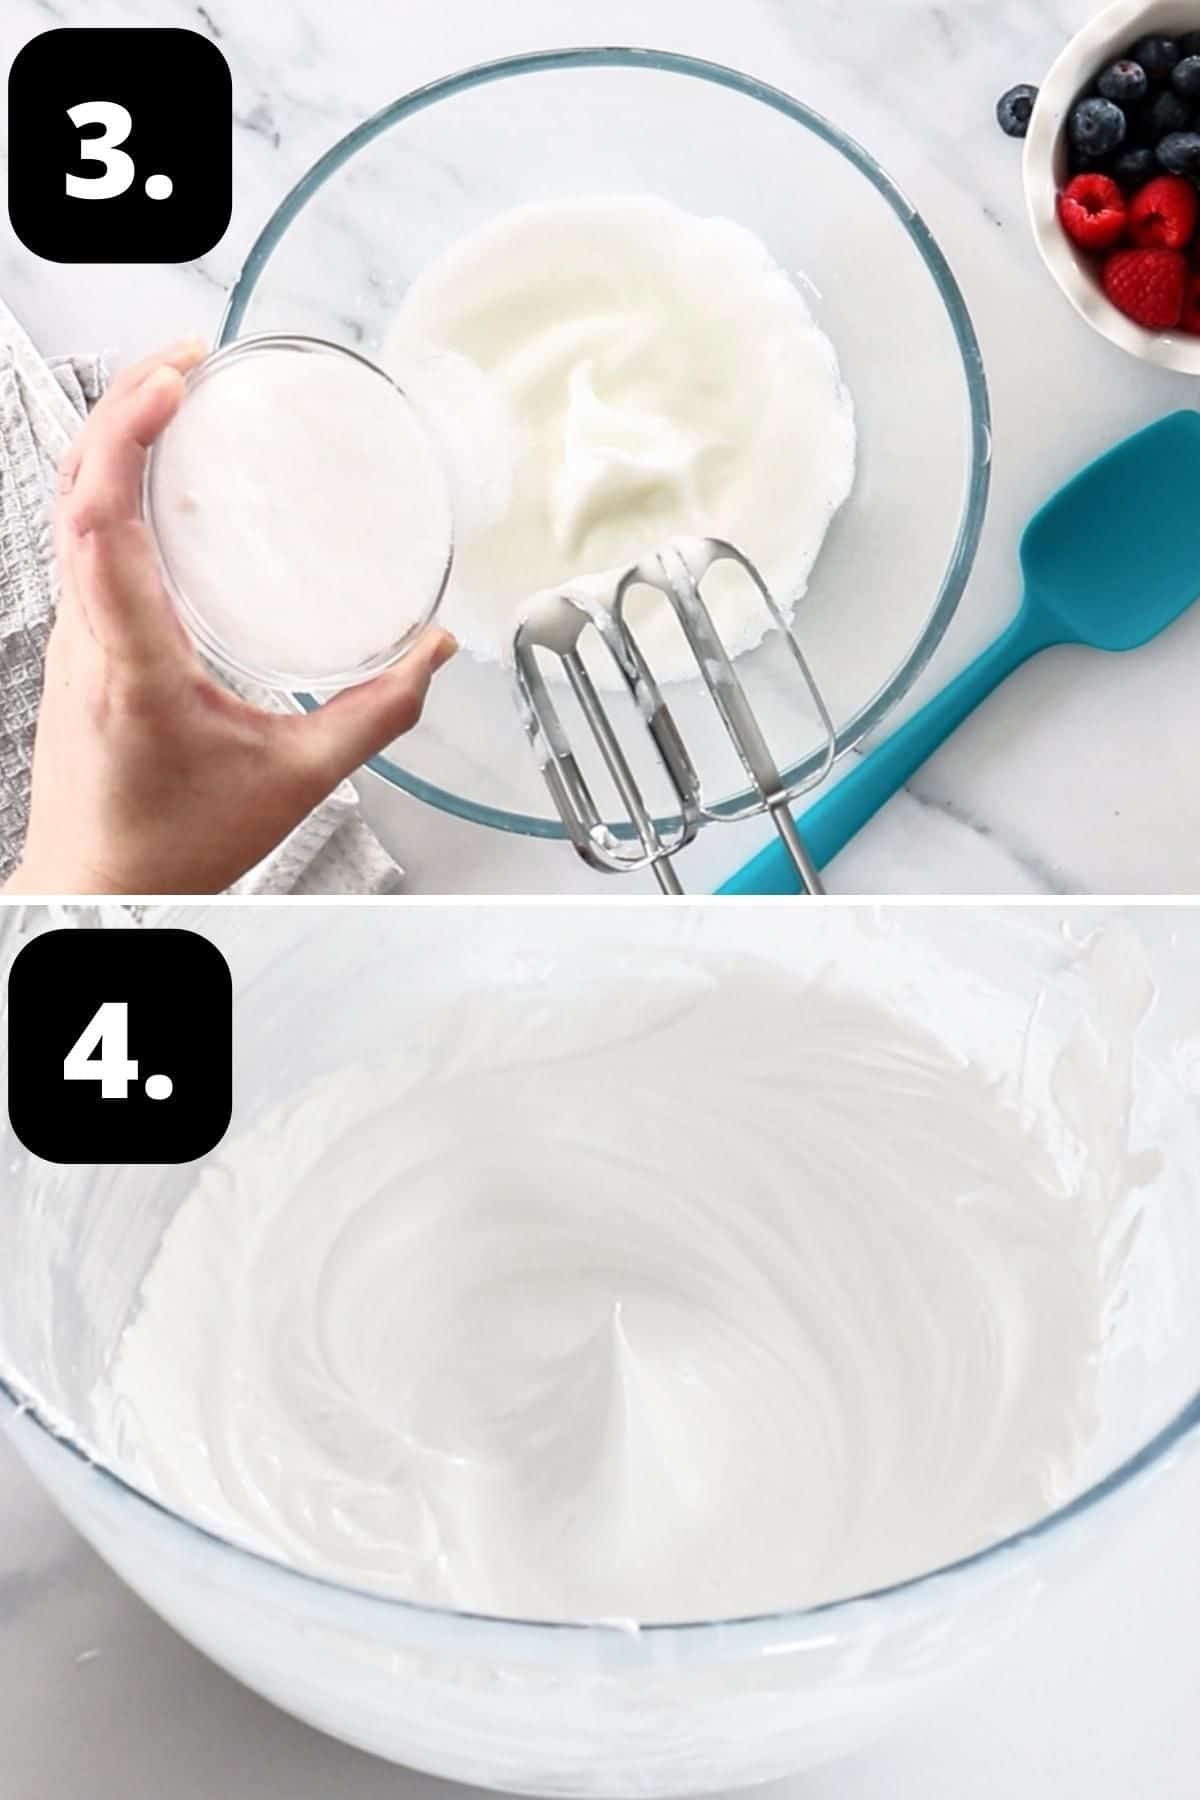 Steps 3-4 of preparing this recipe - adding the sugar to the egg whites and the beaten mixture.